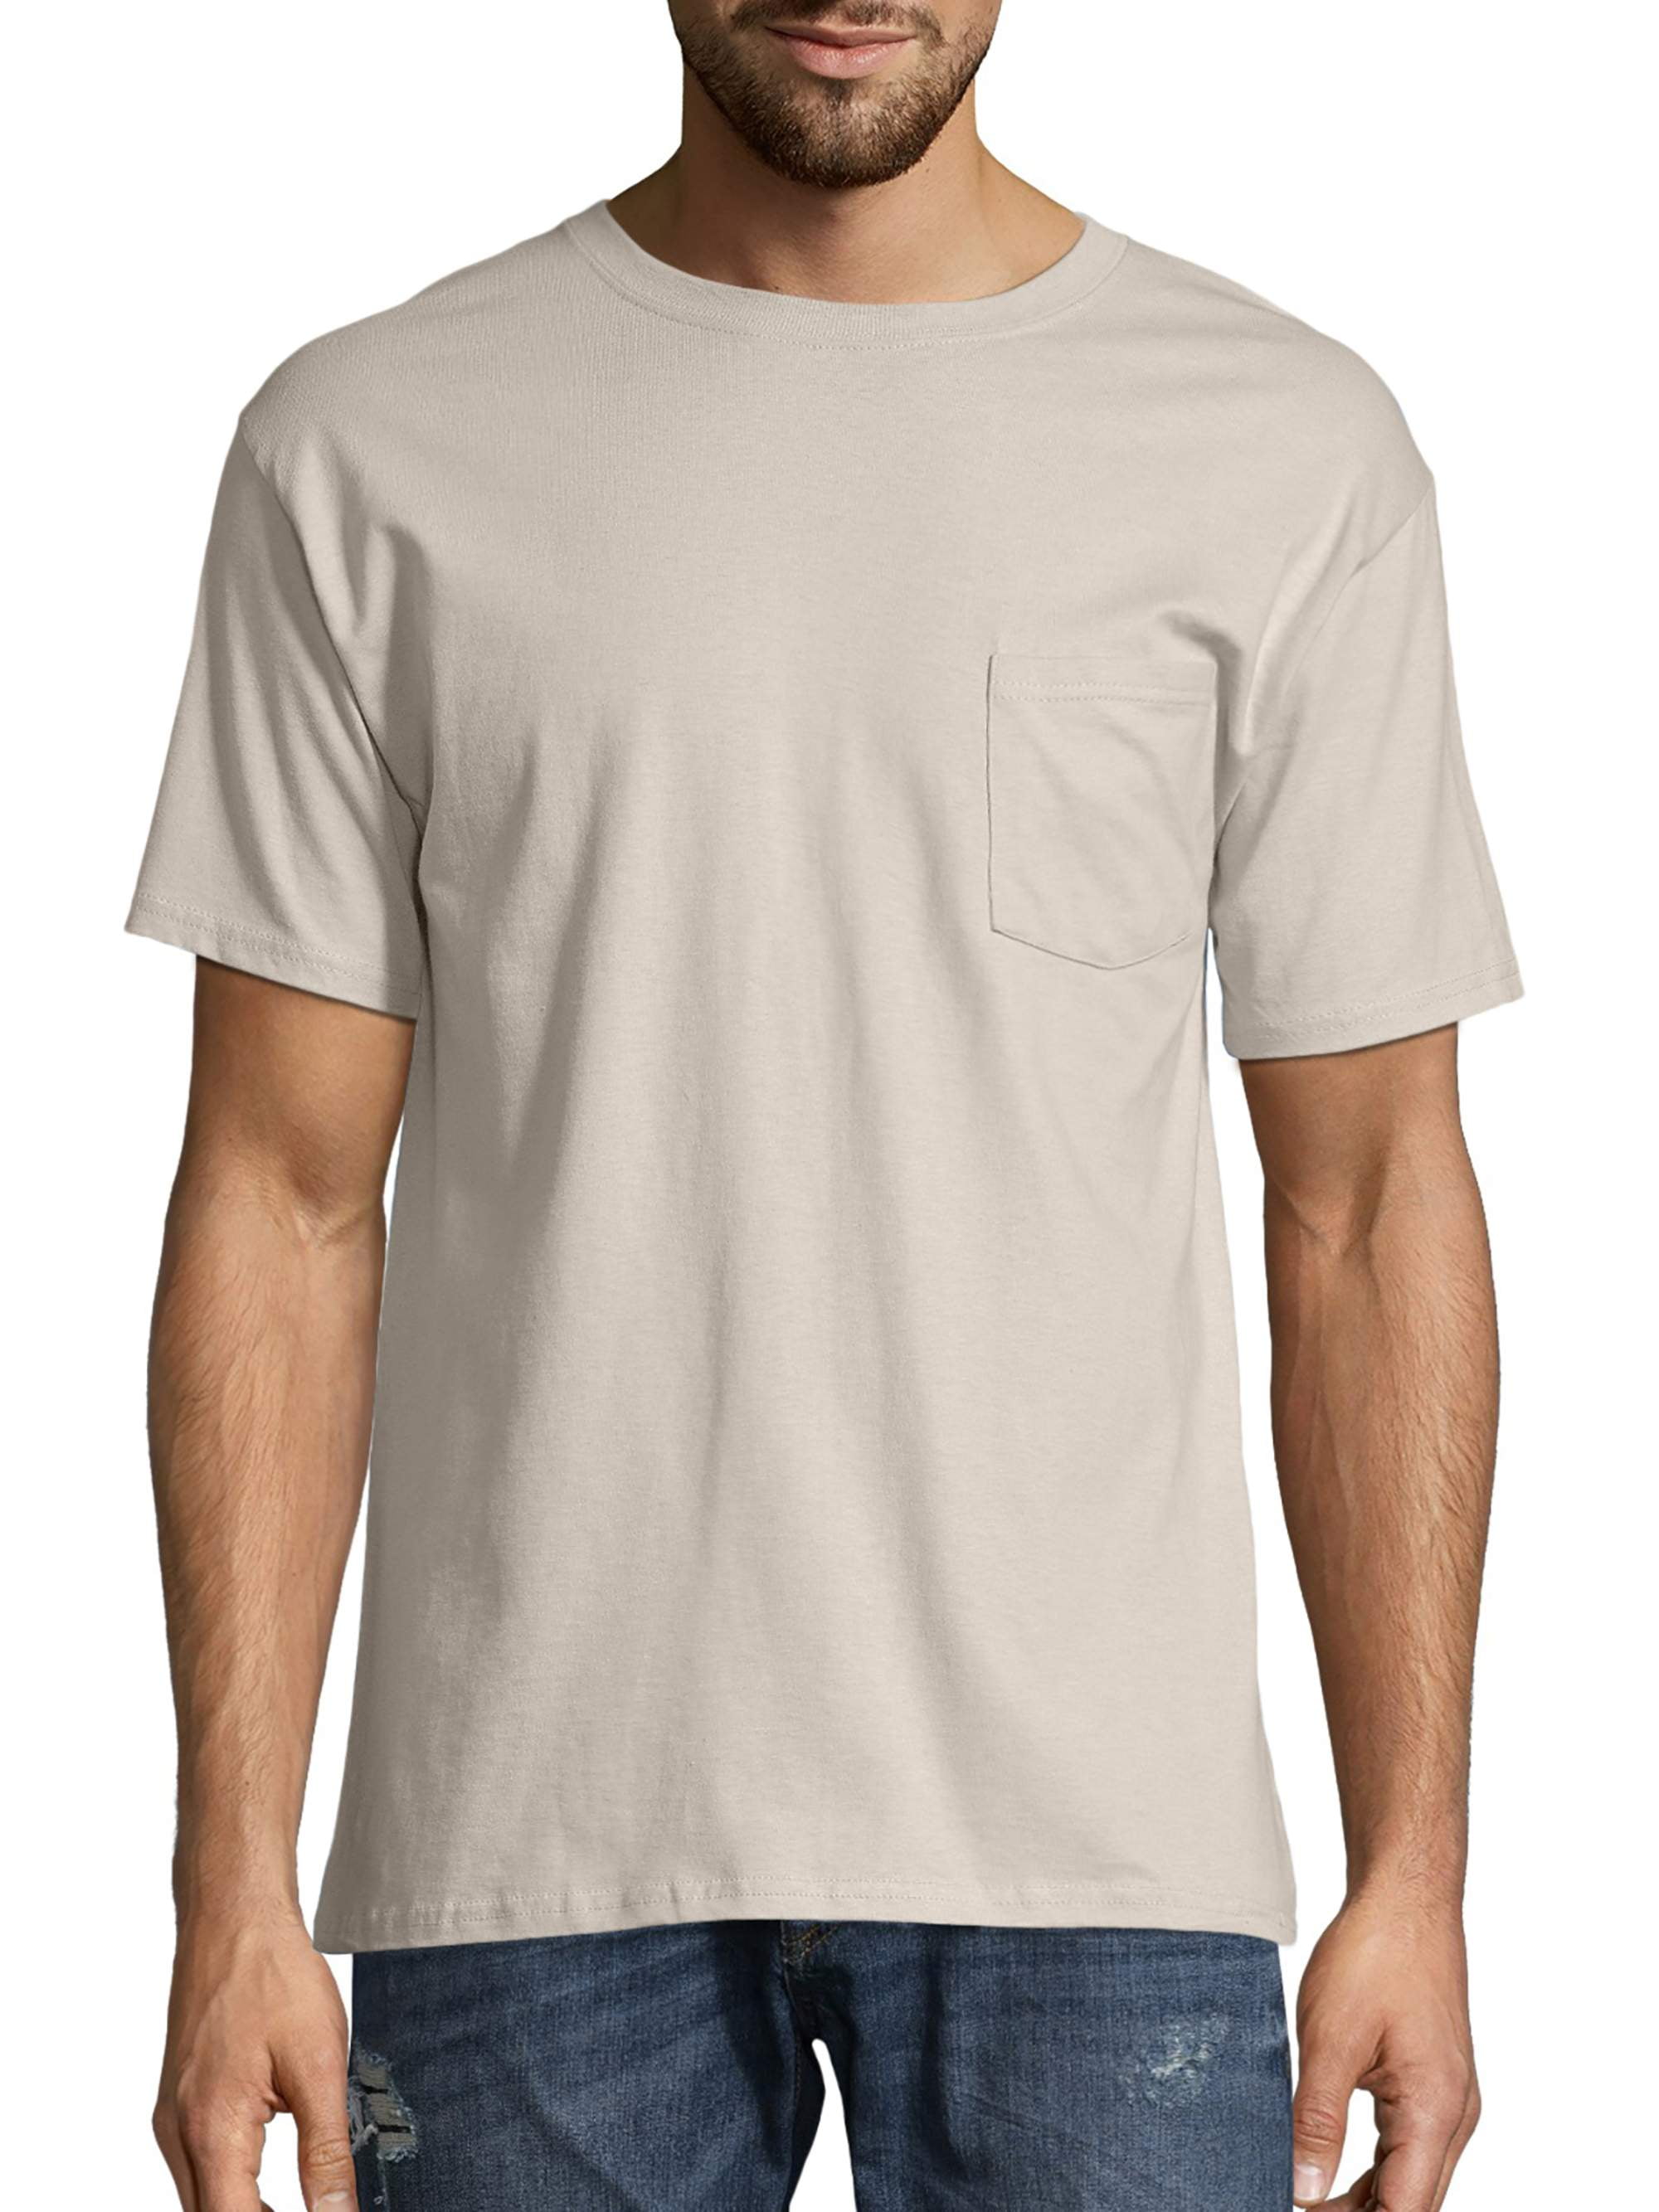 Im Special S Hanes Tagless Tee T-Shirt